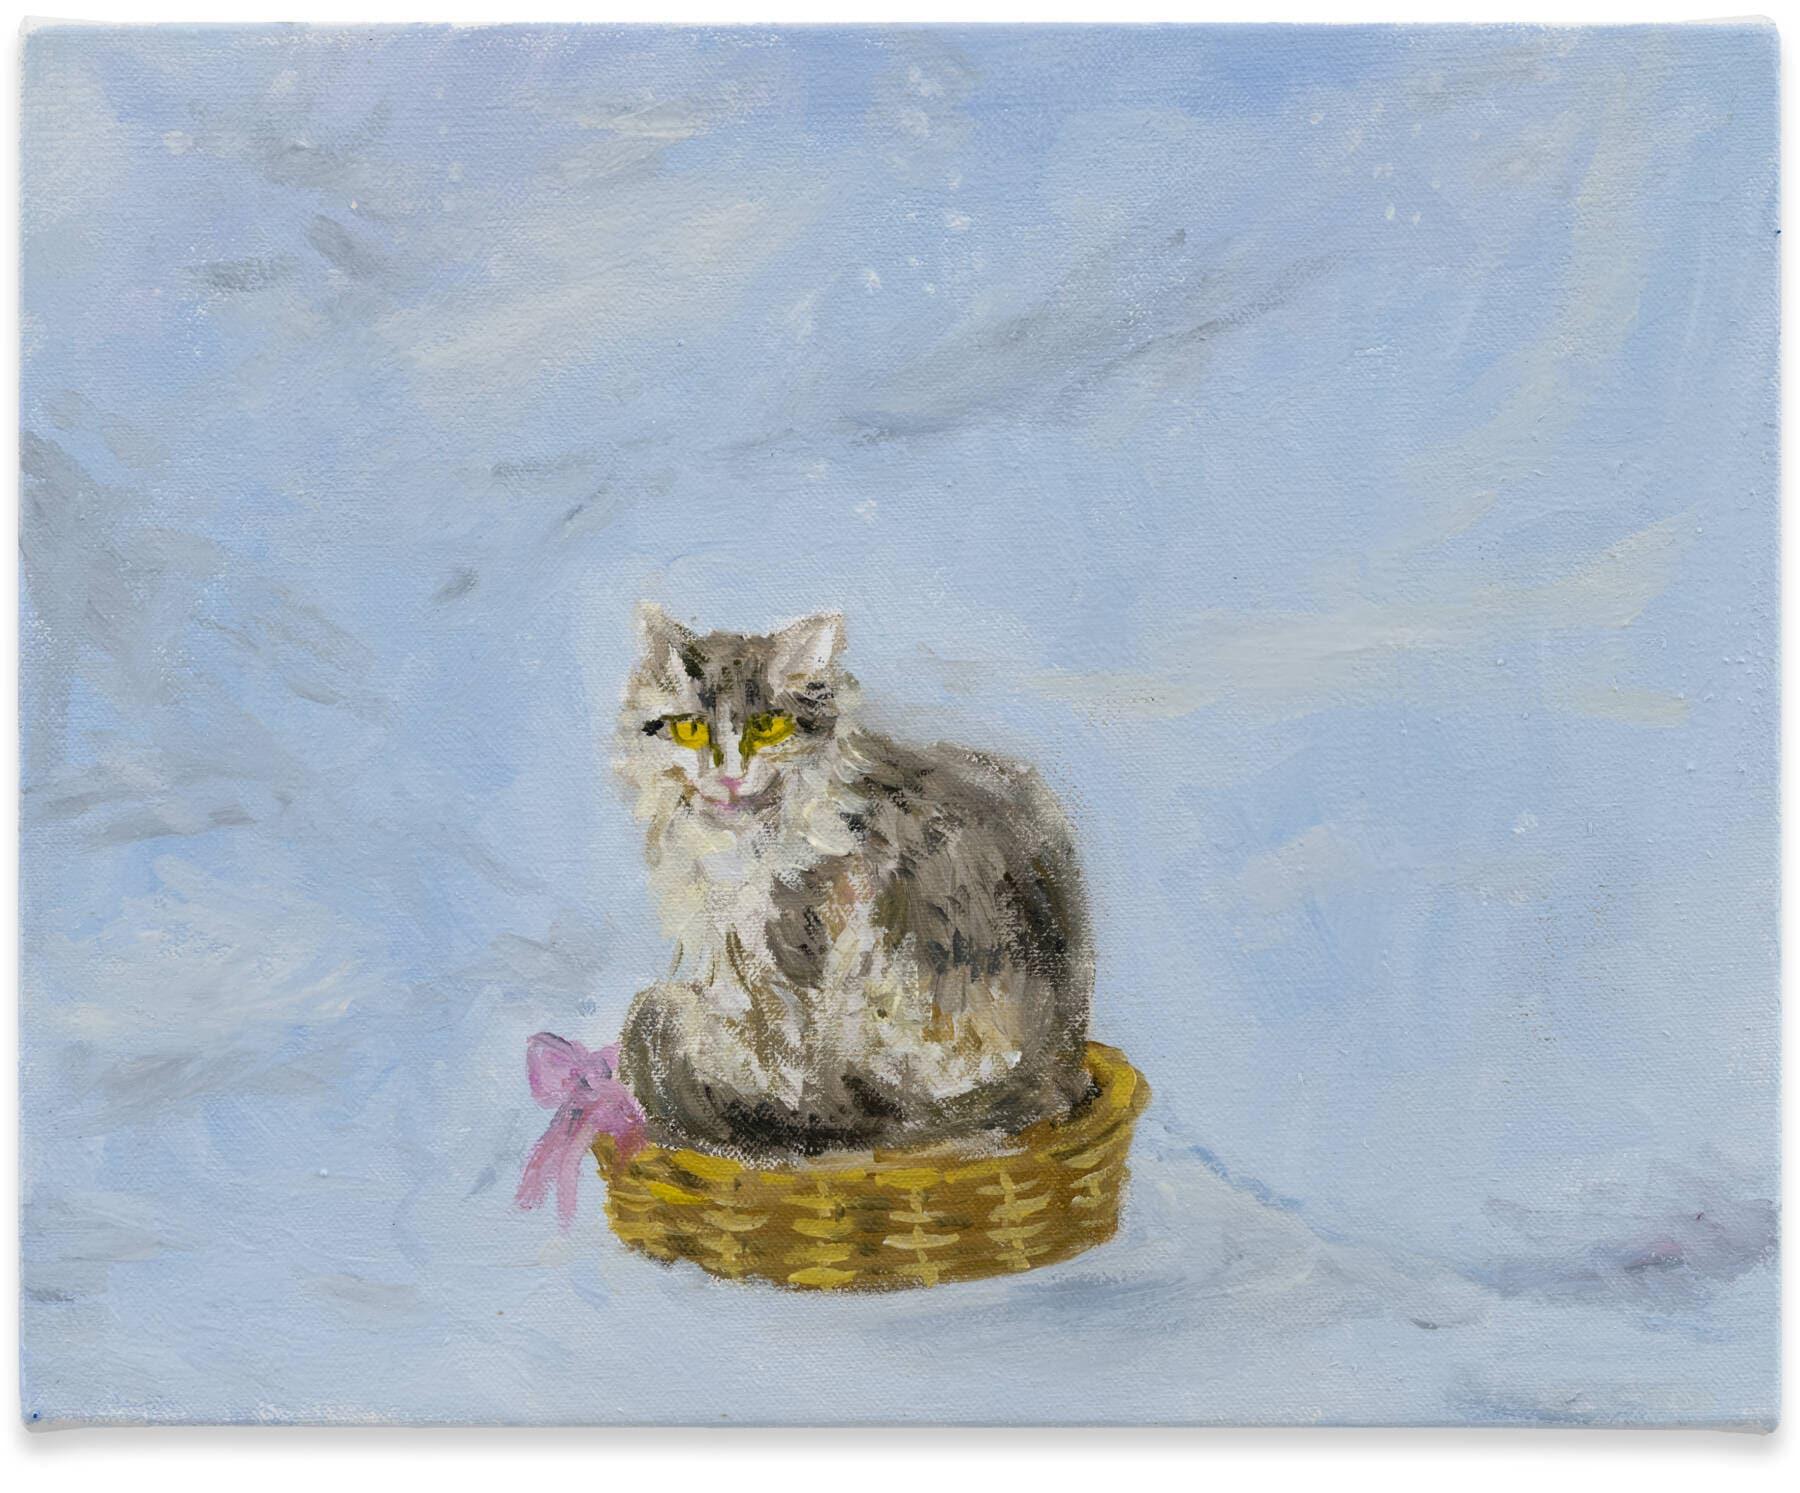 4 karen kilimnik the cat sitting in its favourite basket out in the blizzard the himalaya courtesy the artist spruth magers and galerie eva presenhuber